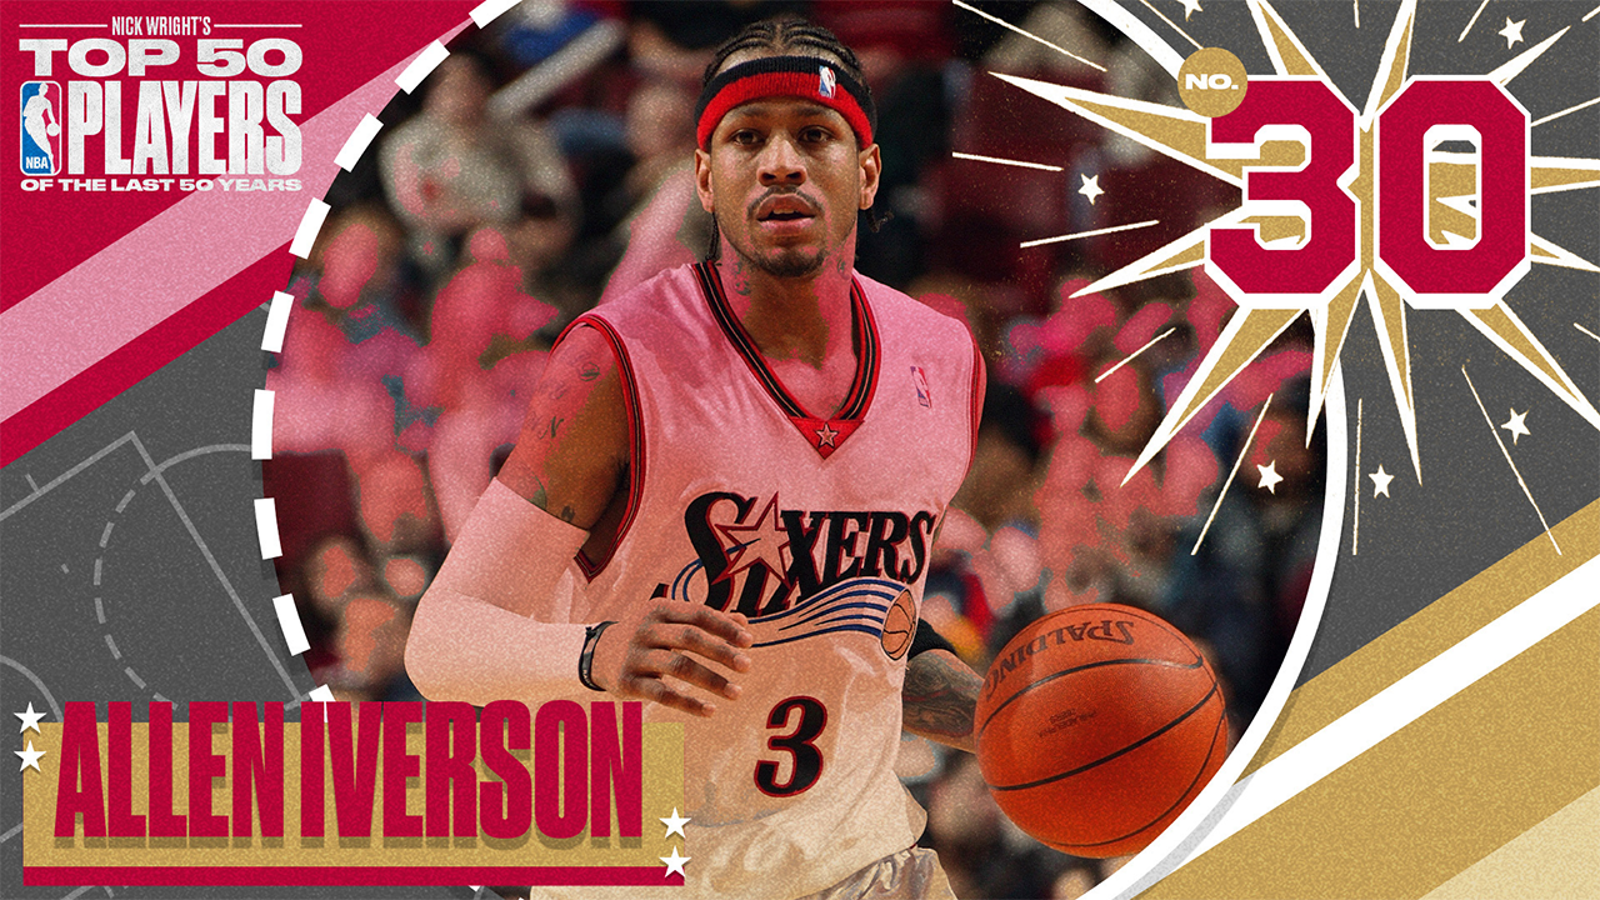 Allen Iverson is No. 30 on Nick Wright's Top 50 NBA Players of the Last 50 Years